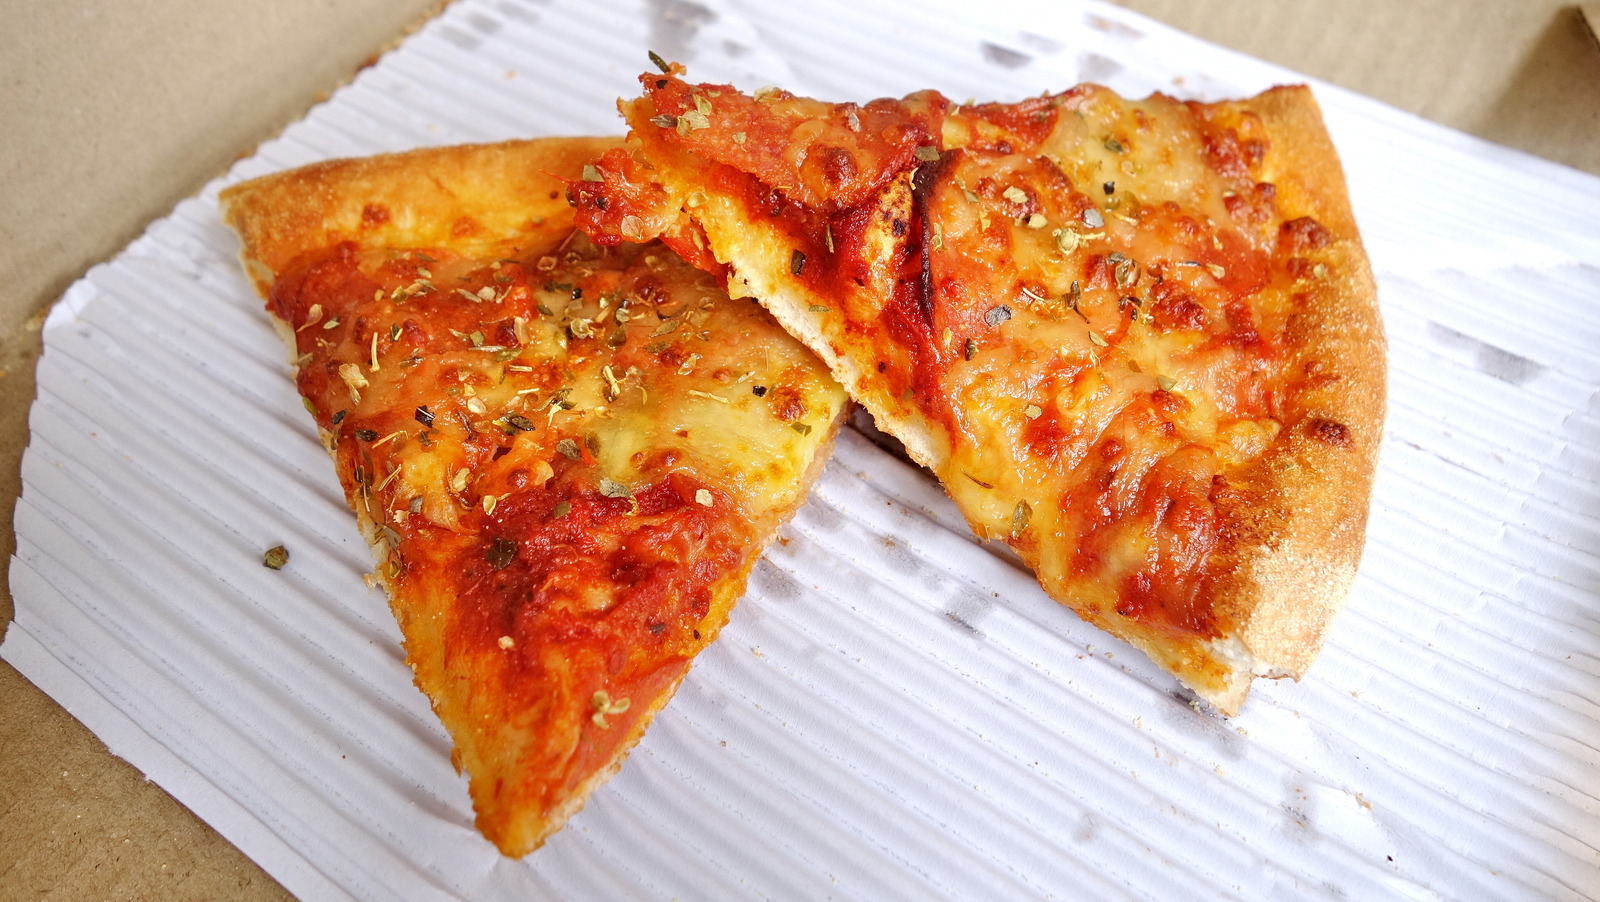 You can assemble lots of different meals from leftover pizza